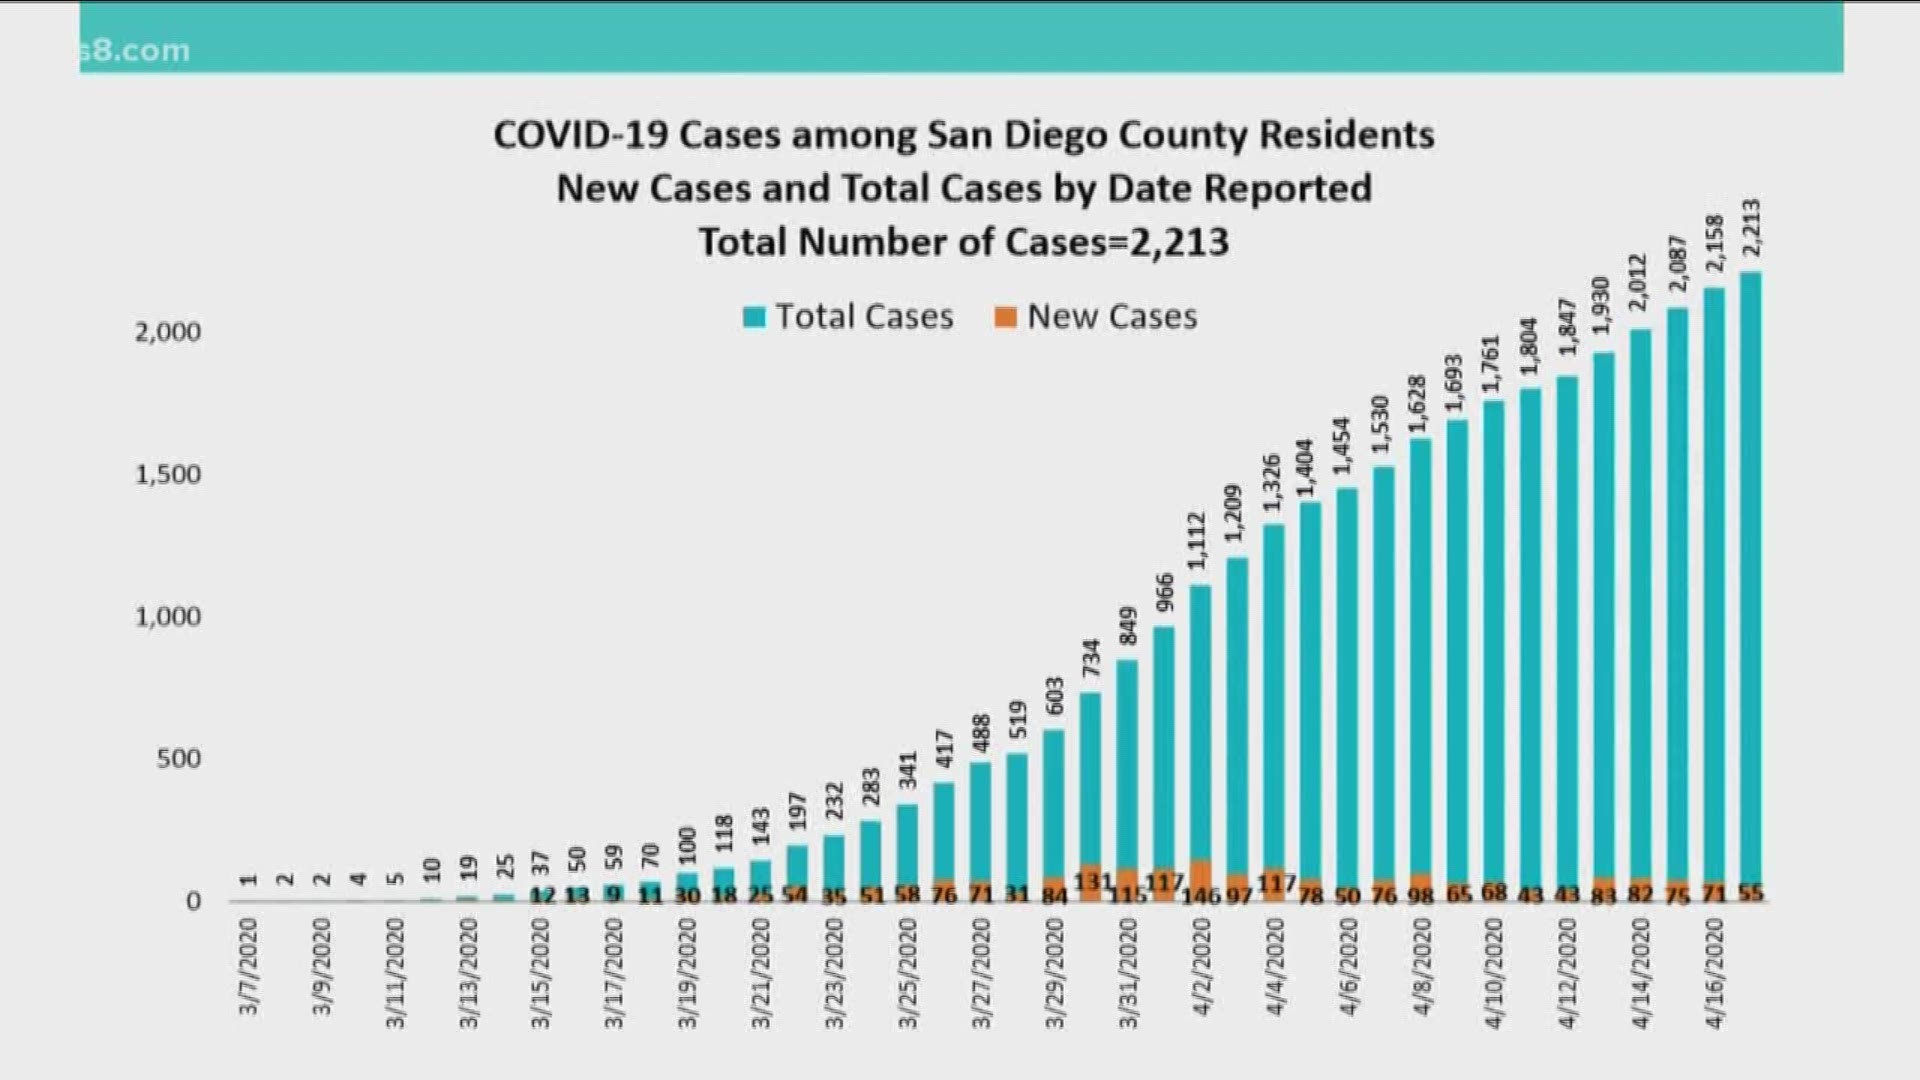 The state released the names of 261 nursing homes in the state, with 11 of them being in San Diego County.